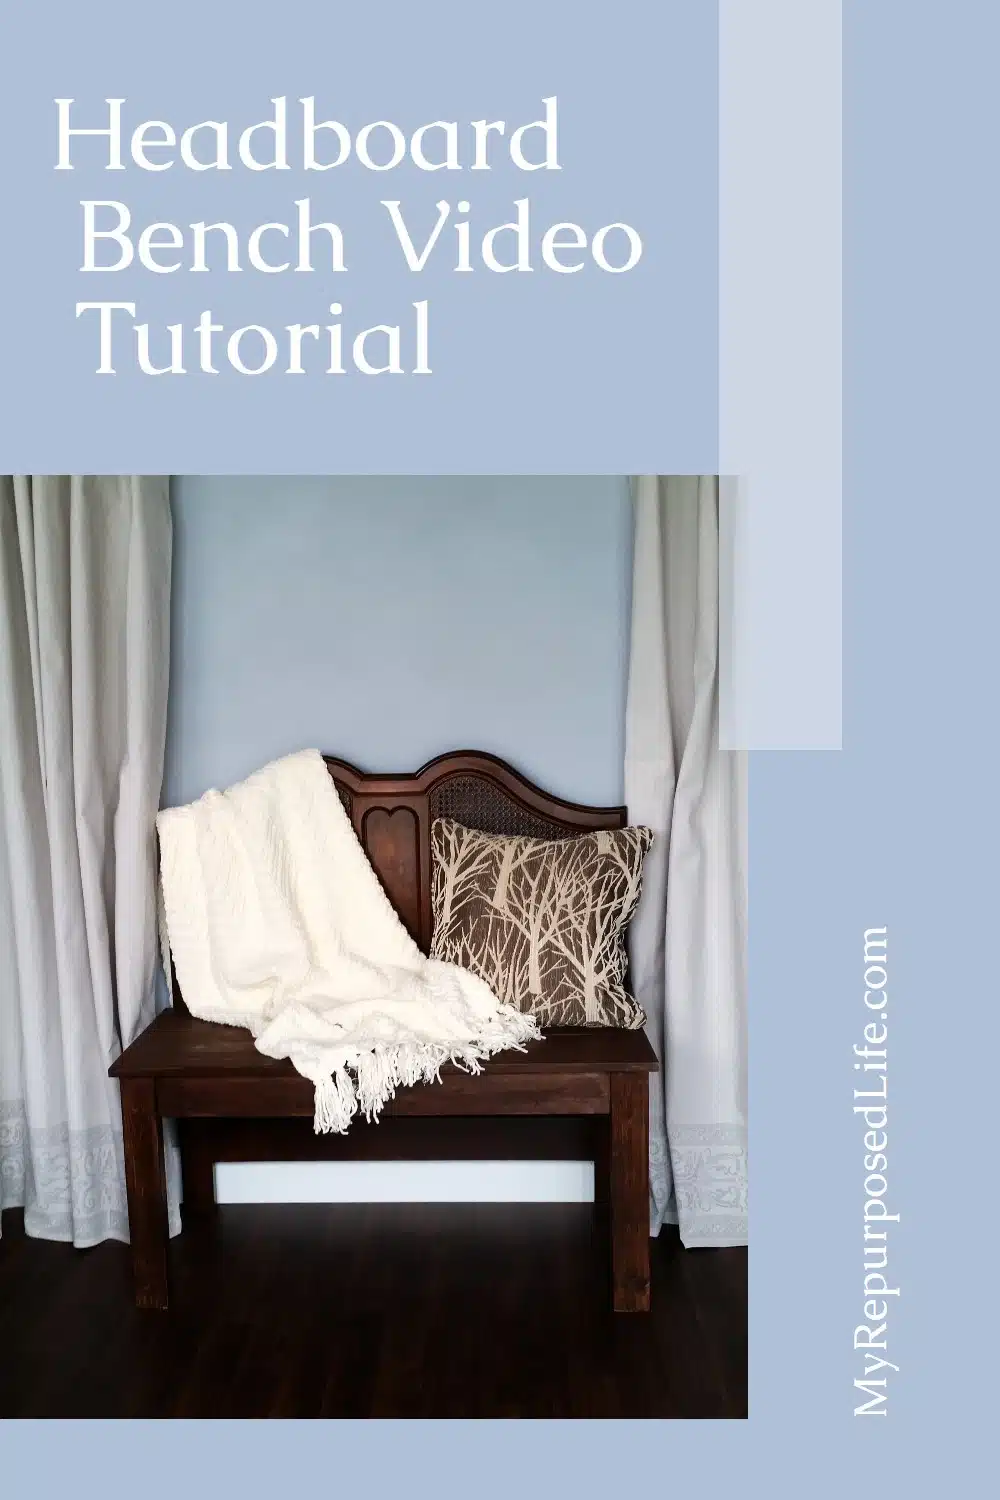 This quick, easy repurposed furniture headboard bench video will show you how easy it is to can make one this weekend. Step by step pictures. #MyRepurposedLife #repurposed #upcycled #furniture #headboard #bench #video #tutoral via @repurposedlife